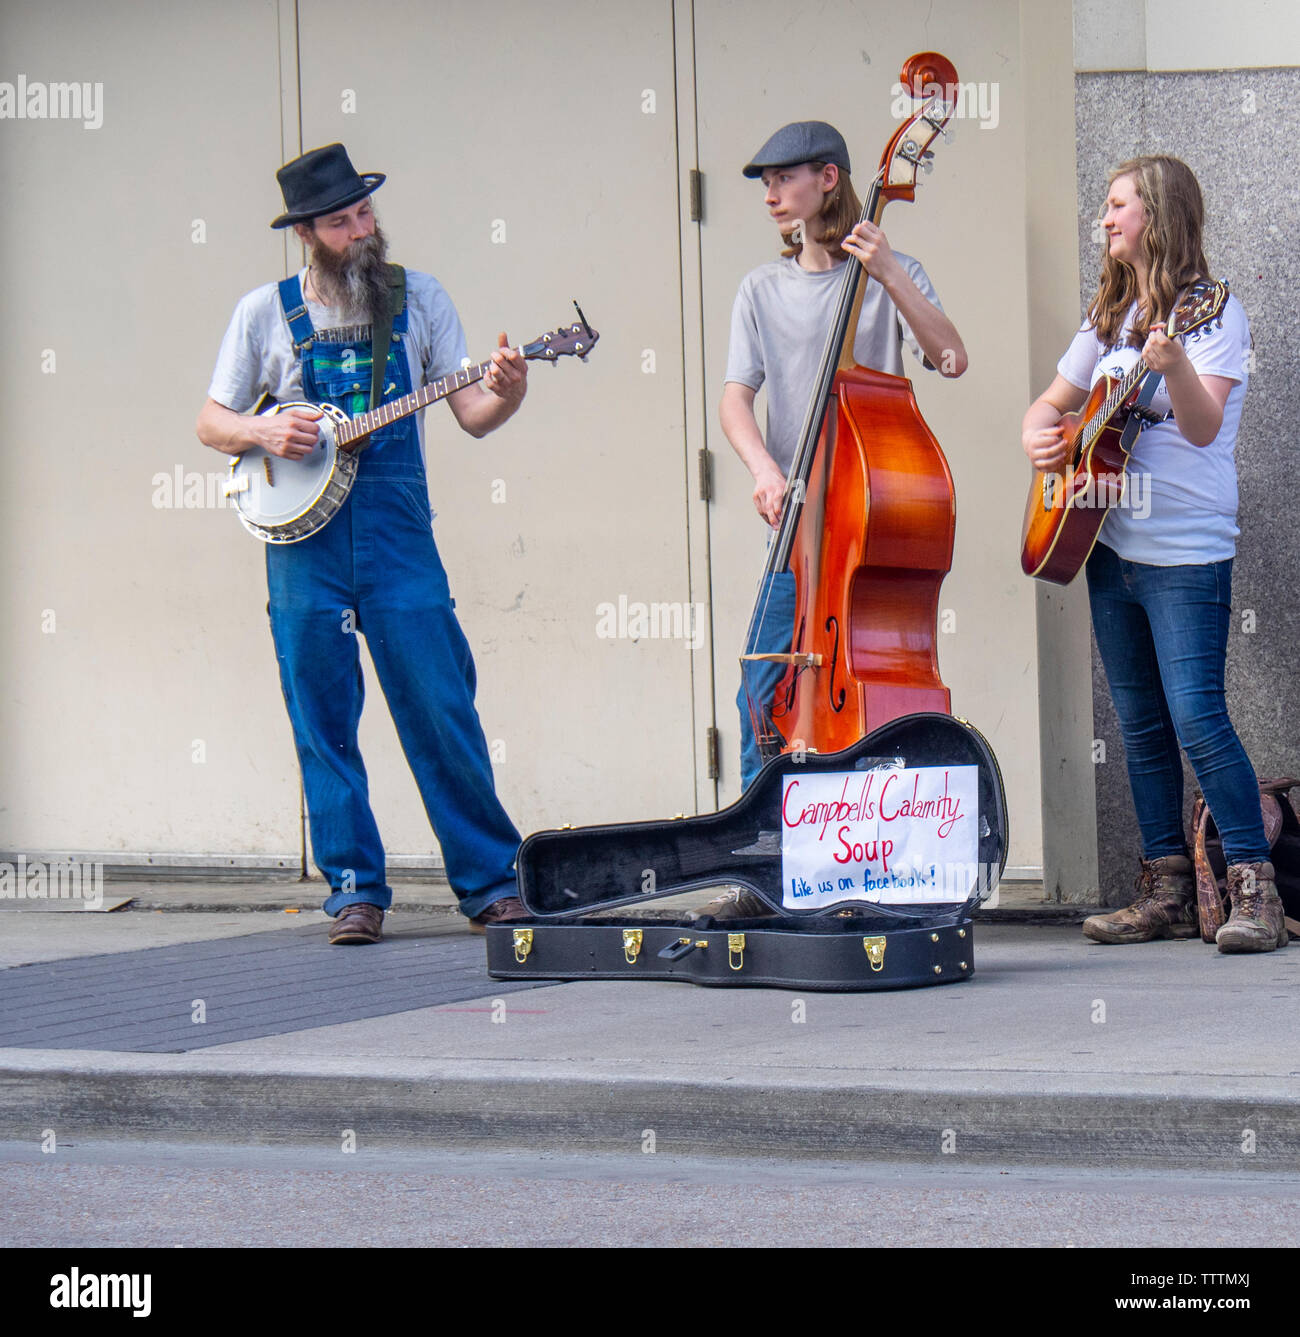 Double bass, banjo and acoustic guitar players in  Campbells Calamity Soup musical group busking on the street in  Nashville Tennessee USA. Stock Photo